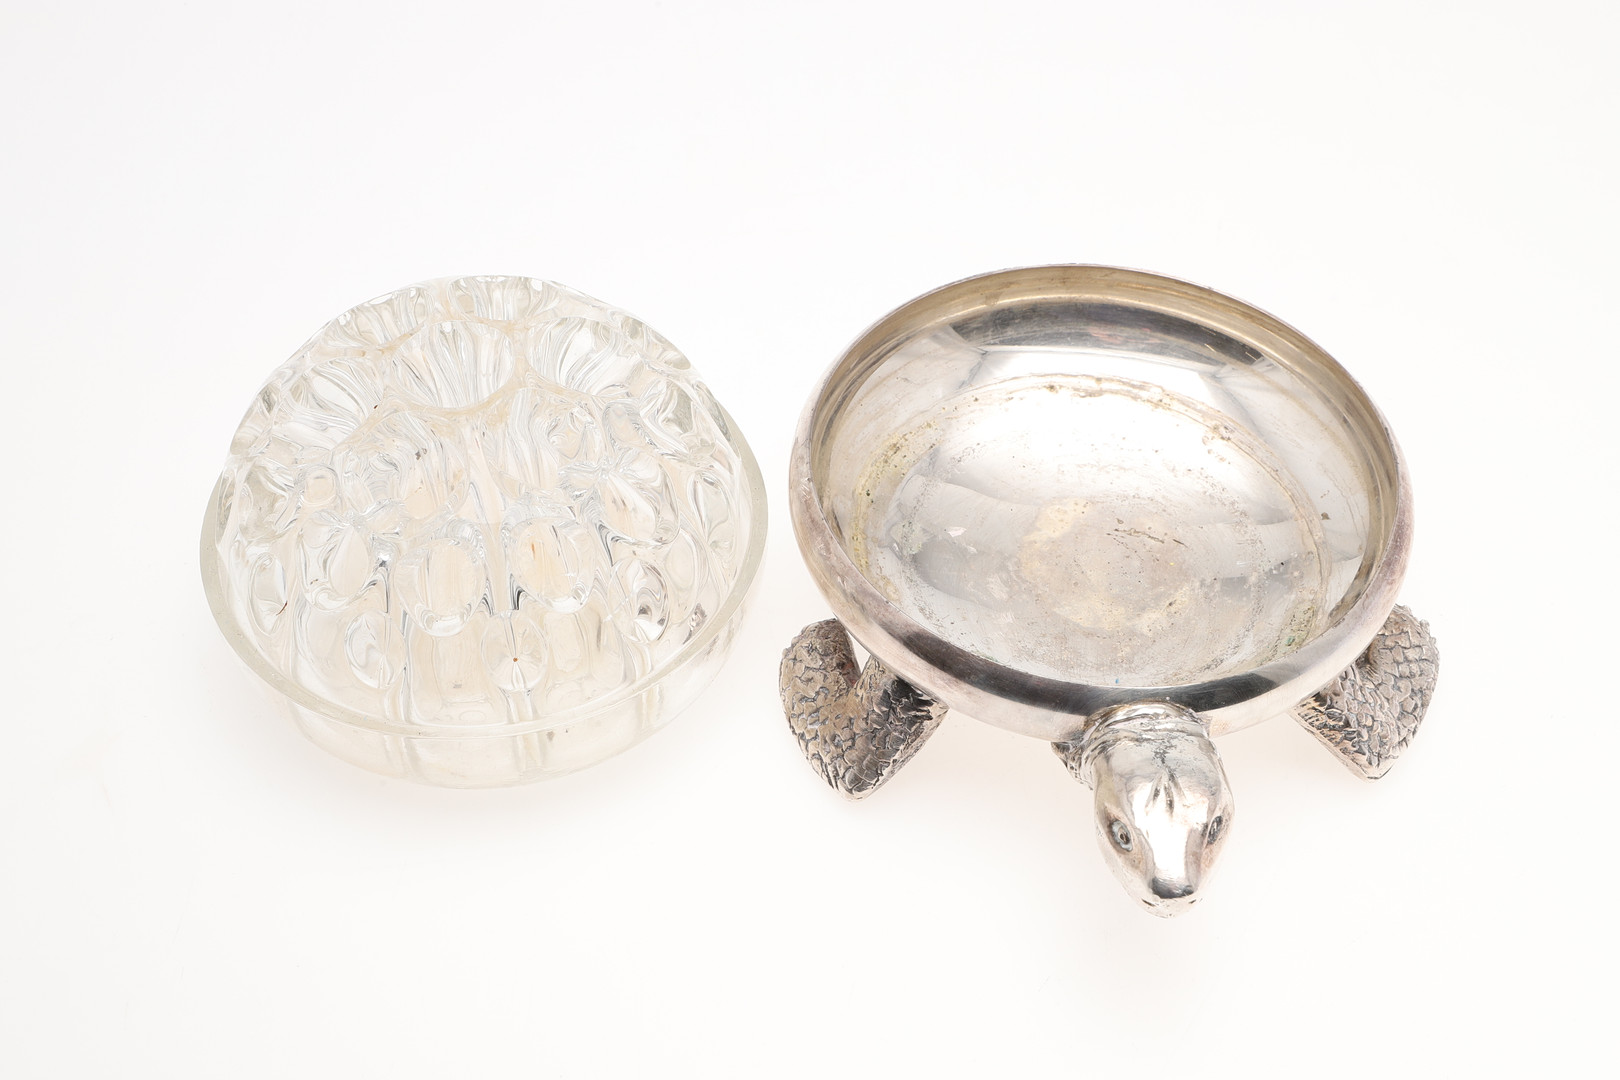 A LATE 19TH/ EARLY 20TH CENTURY CONTINENTAL GLASS MOUNTED SILVER TABLE DECORATION. - Image 4 of 6